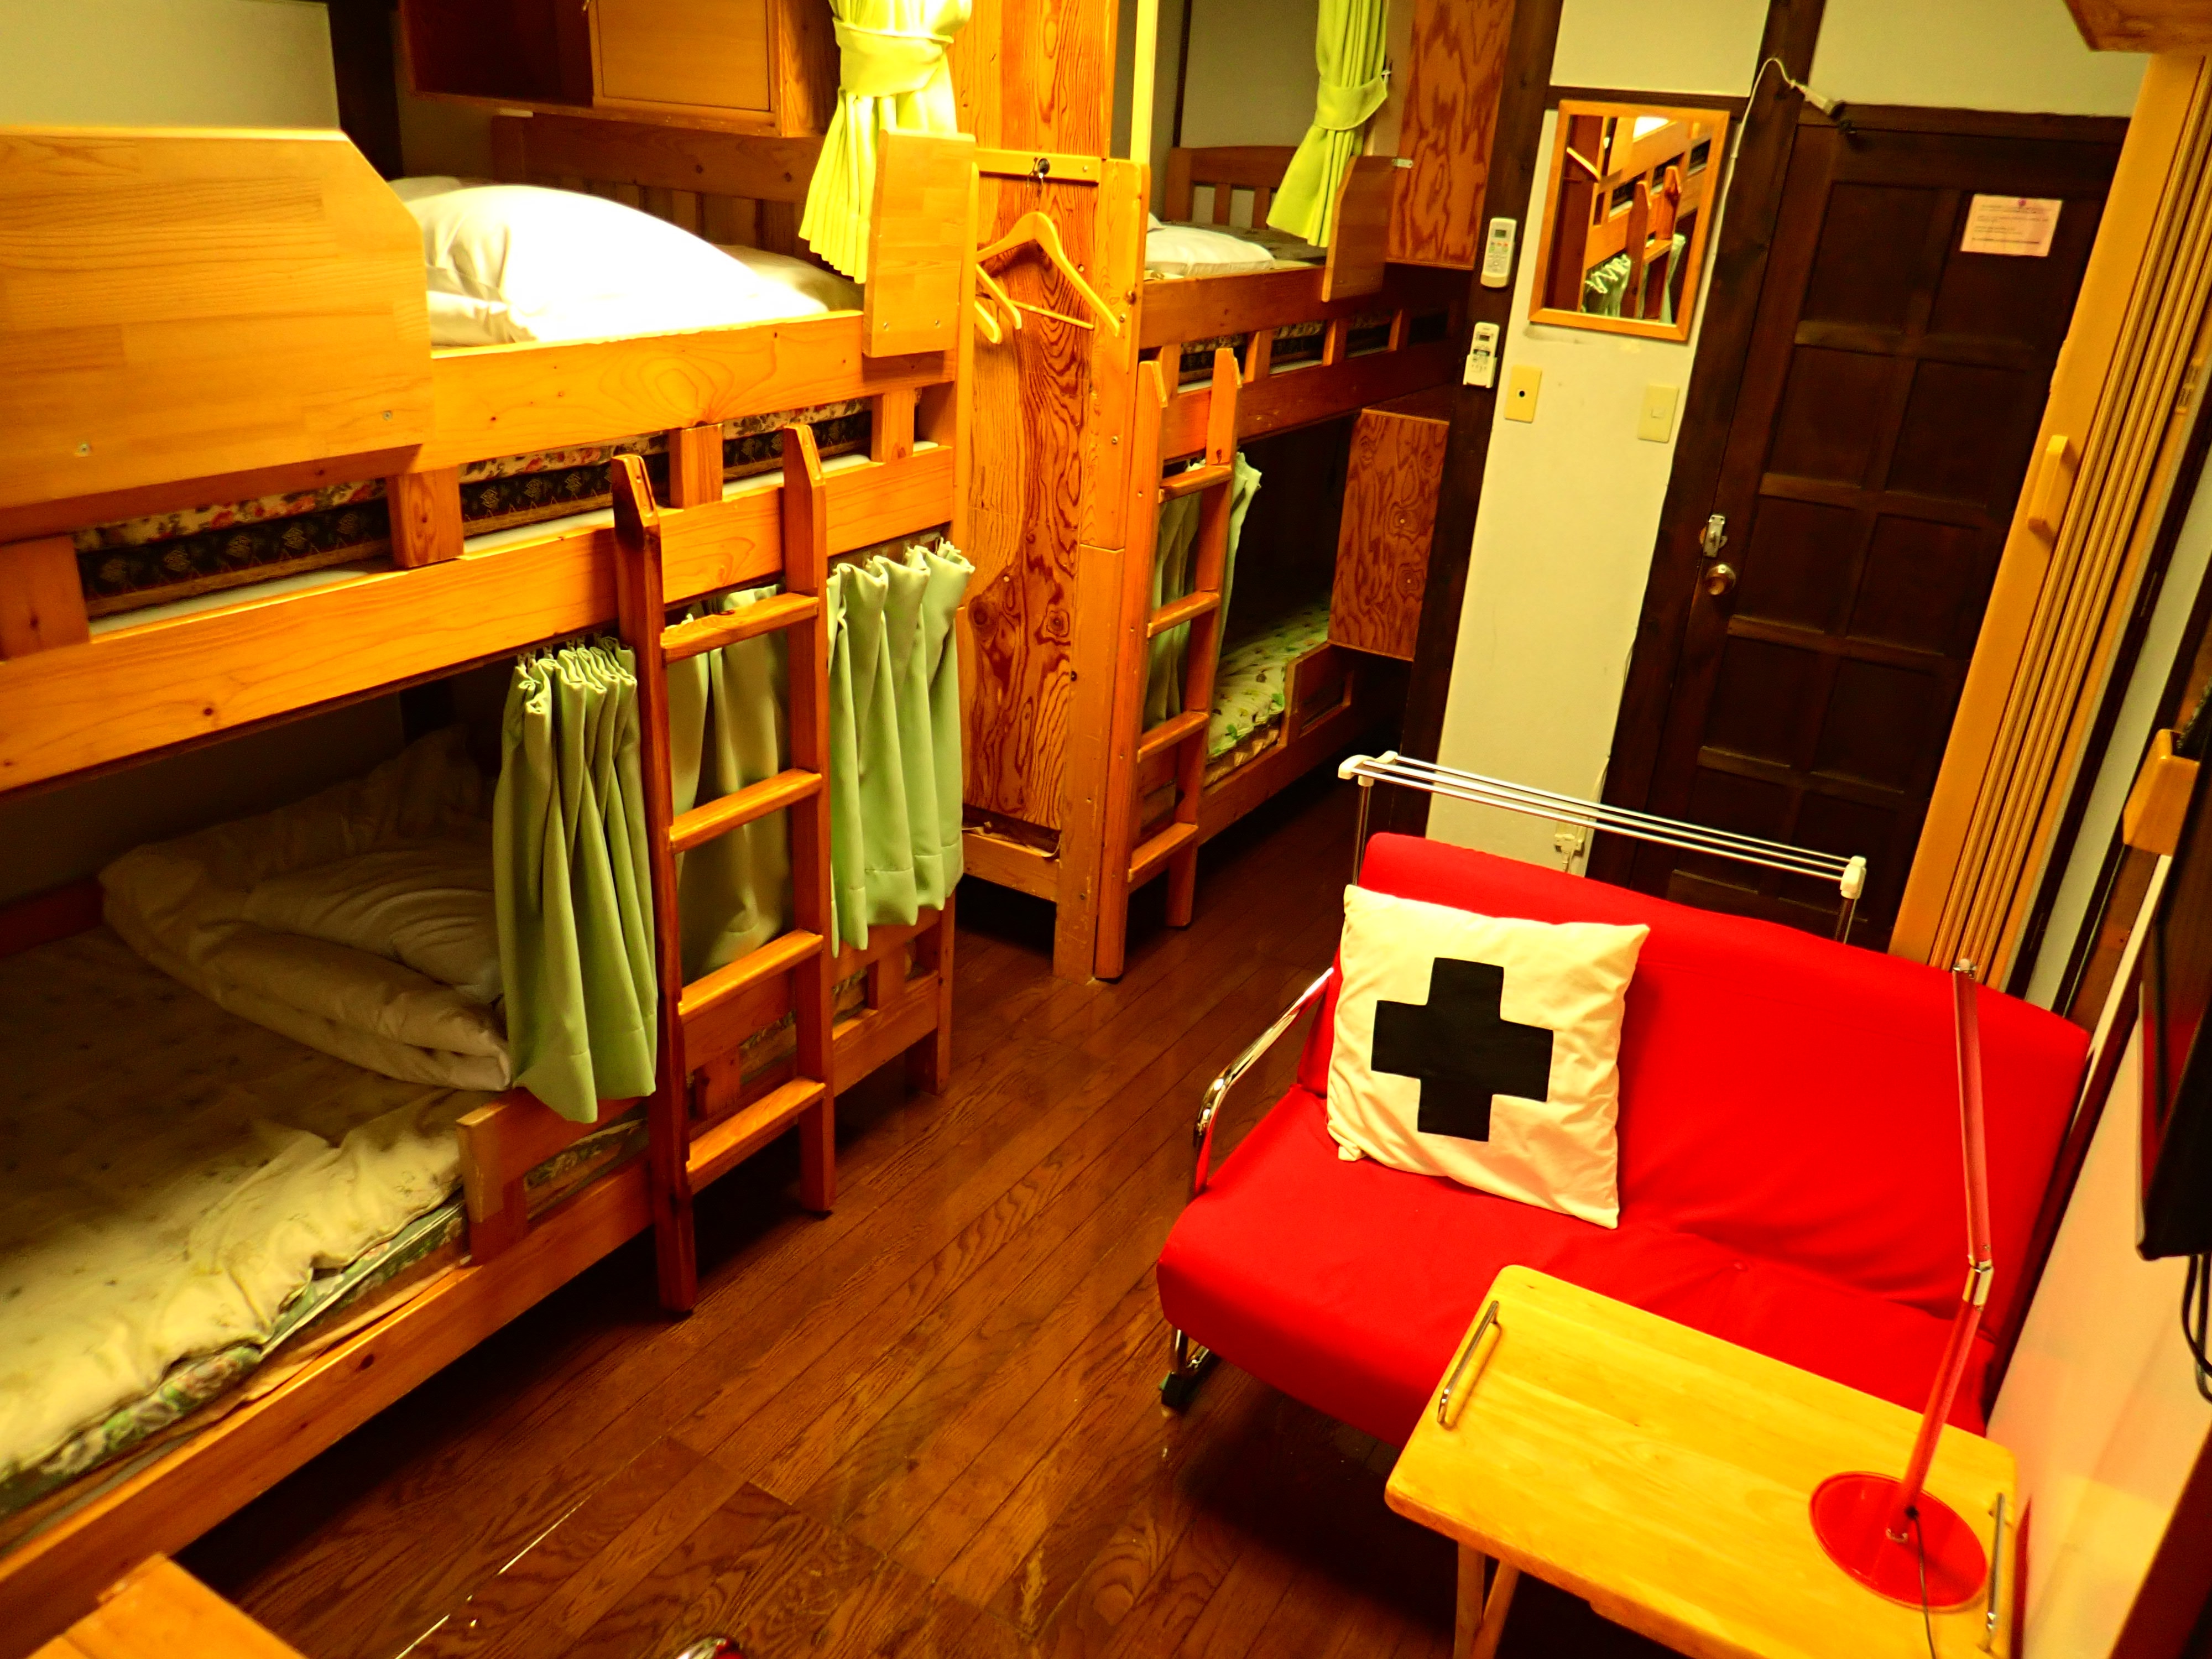 [Example of shared room] Enjoy the interaction between travelers here!